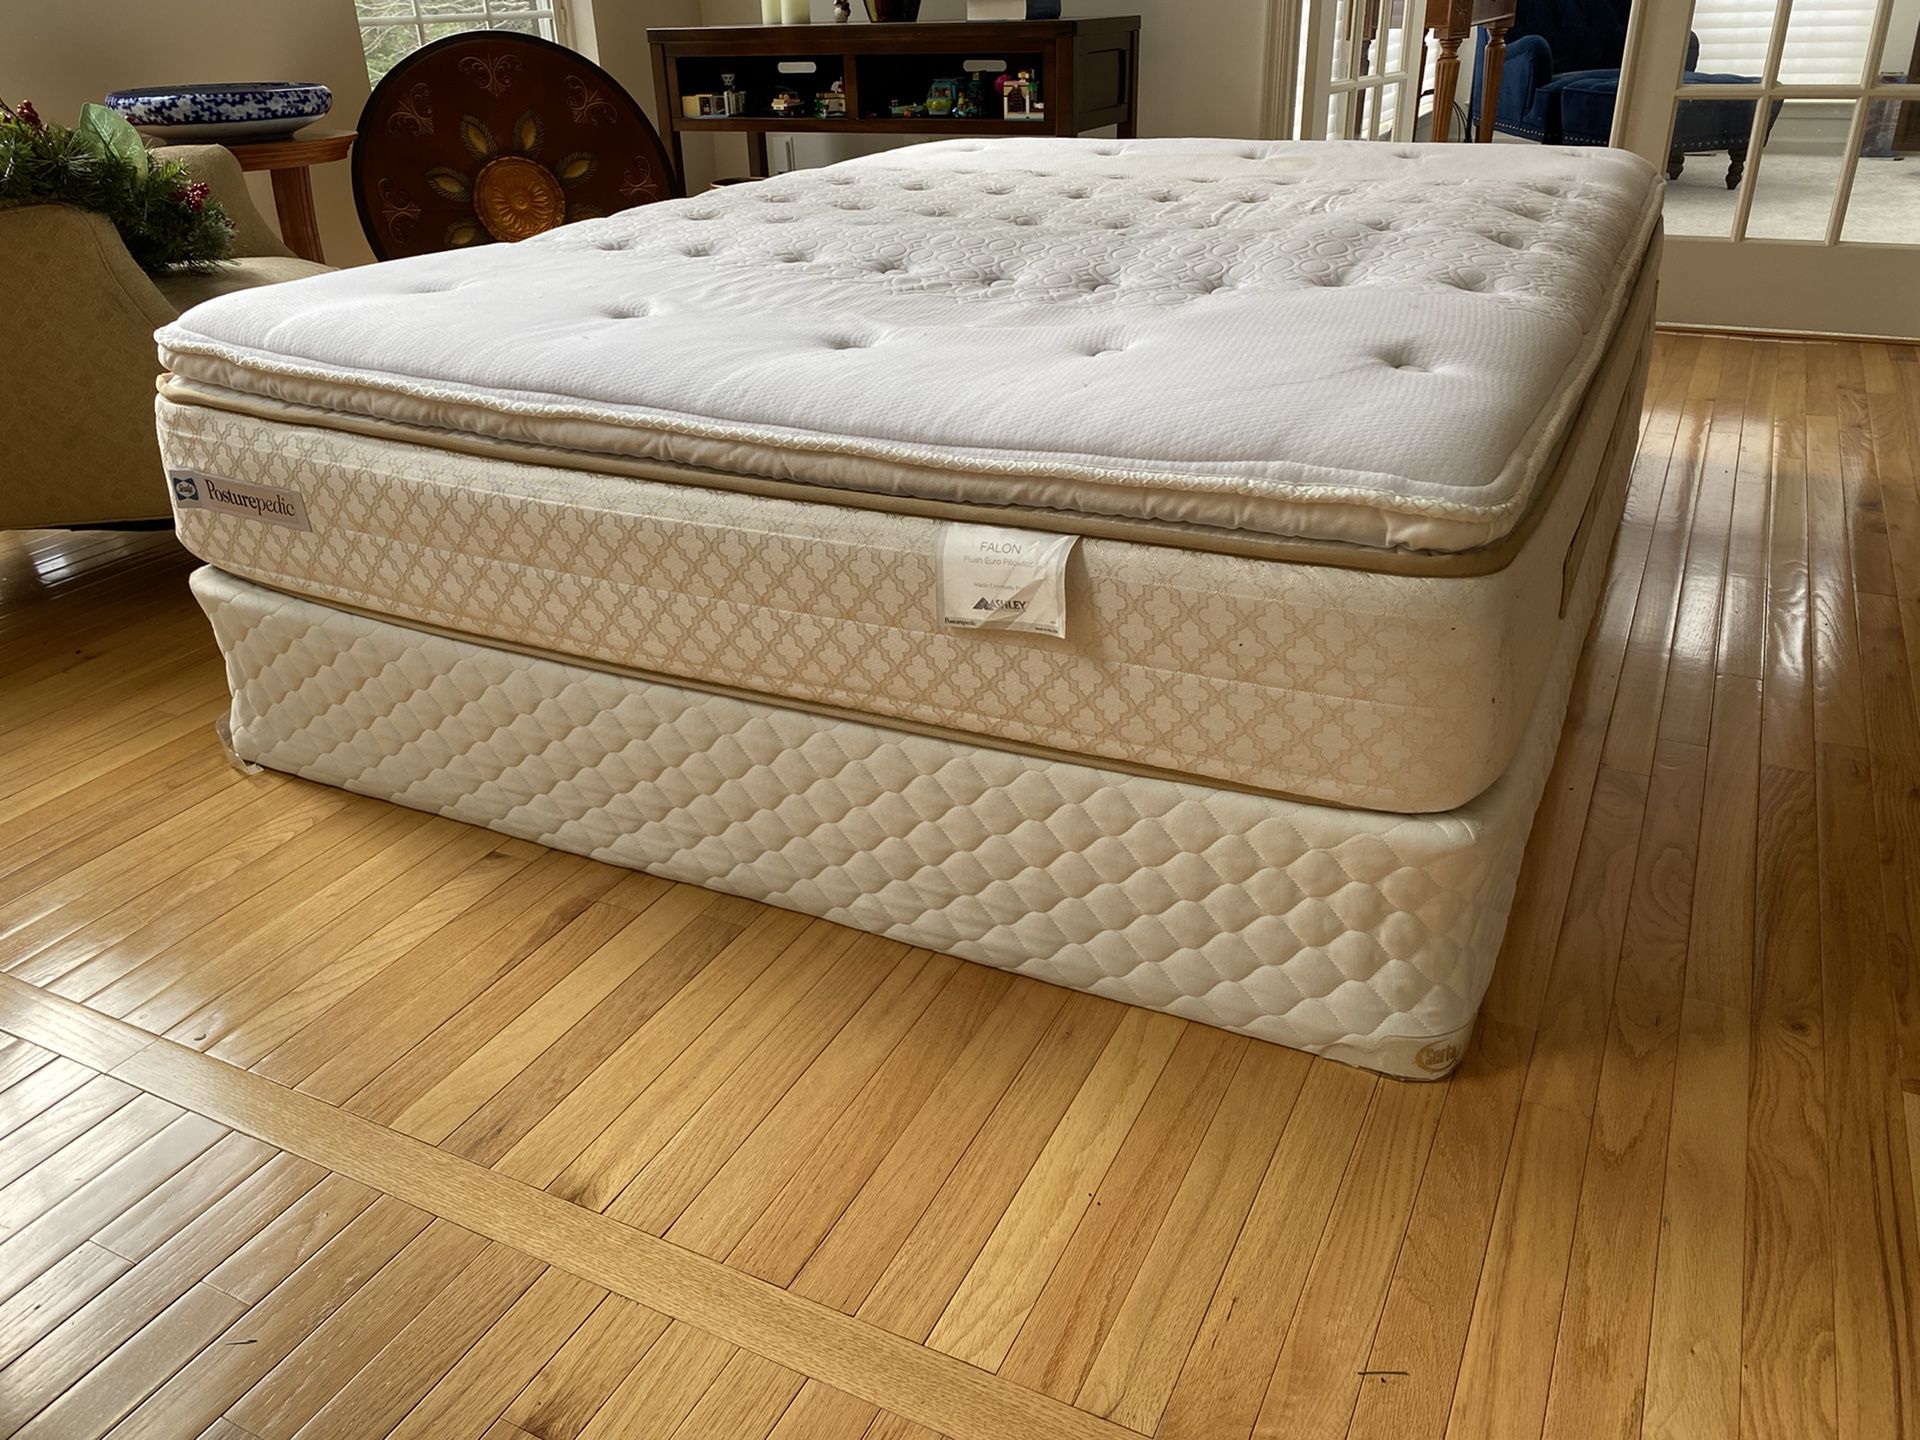 Queen Sealy Posturepedic Mattress And Box Springs